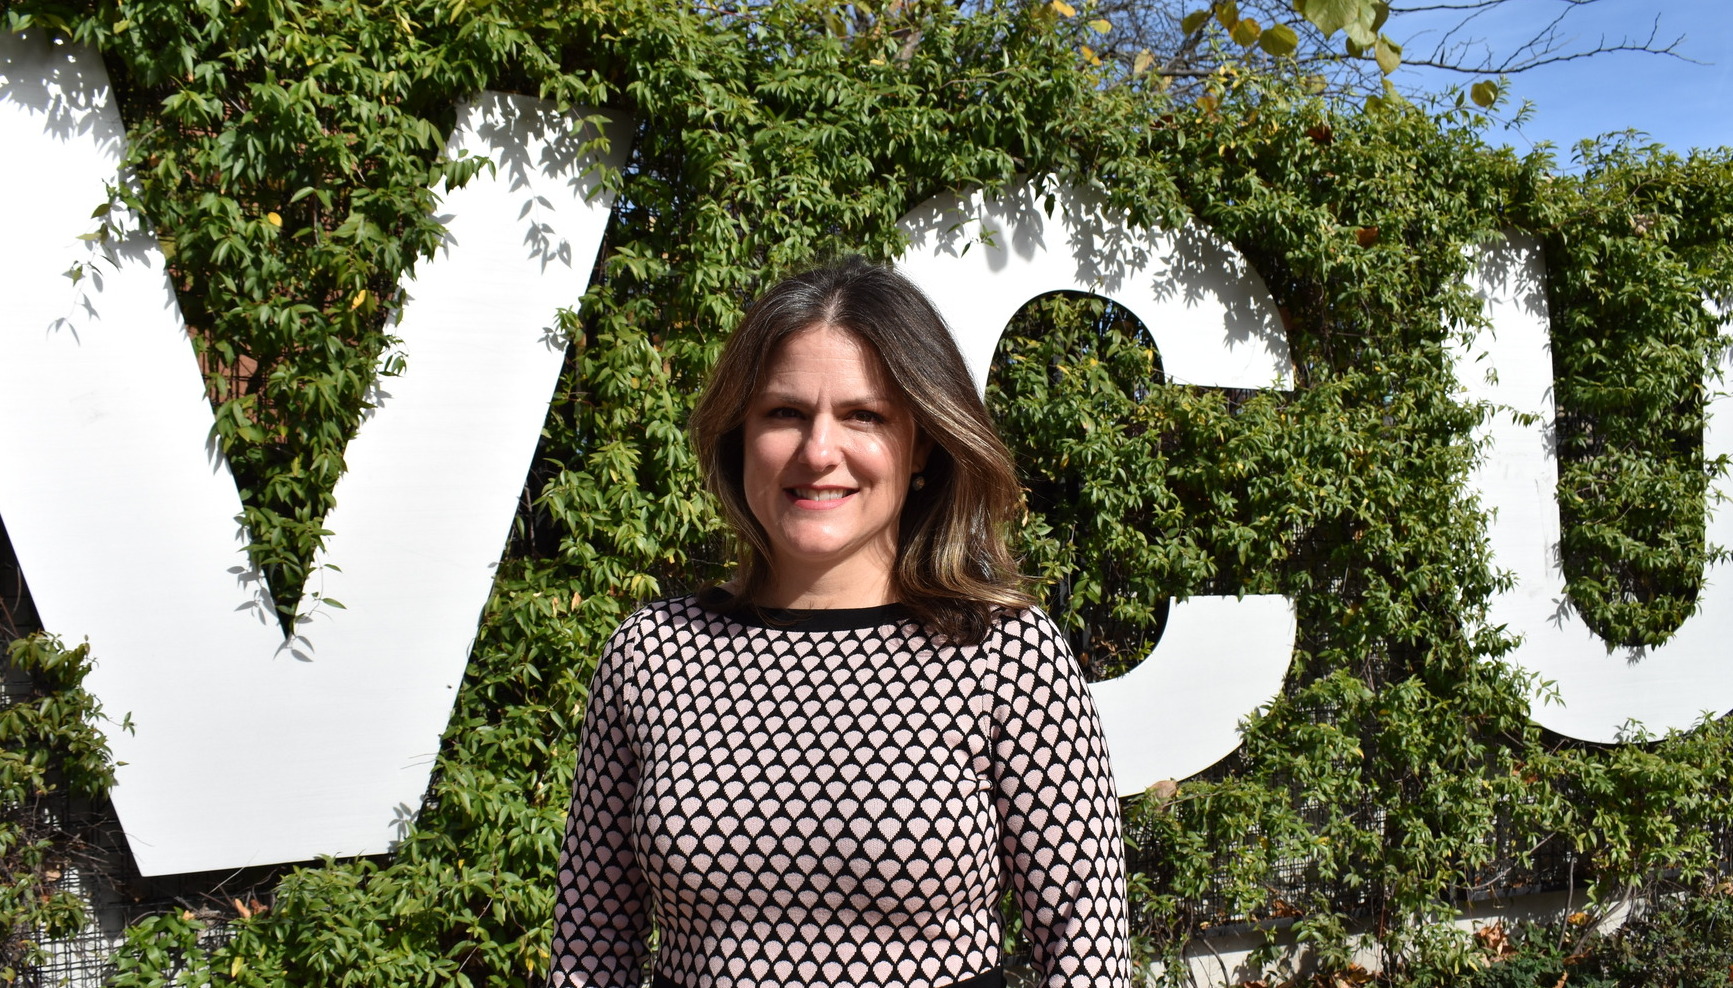 Dr. Lingold poses outside in front of a large white "VCU" sign with beautiful green foliage around it. She wears a printed long-sleeve dress.